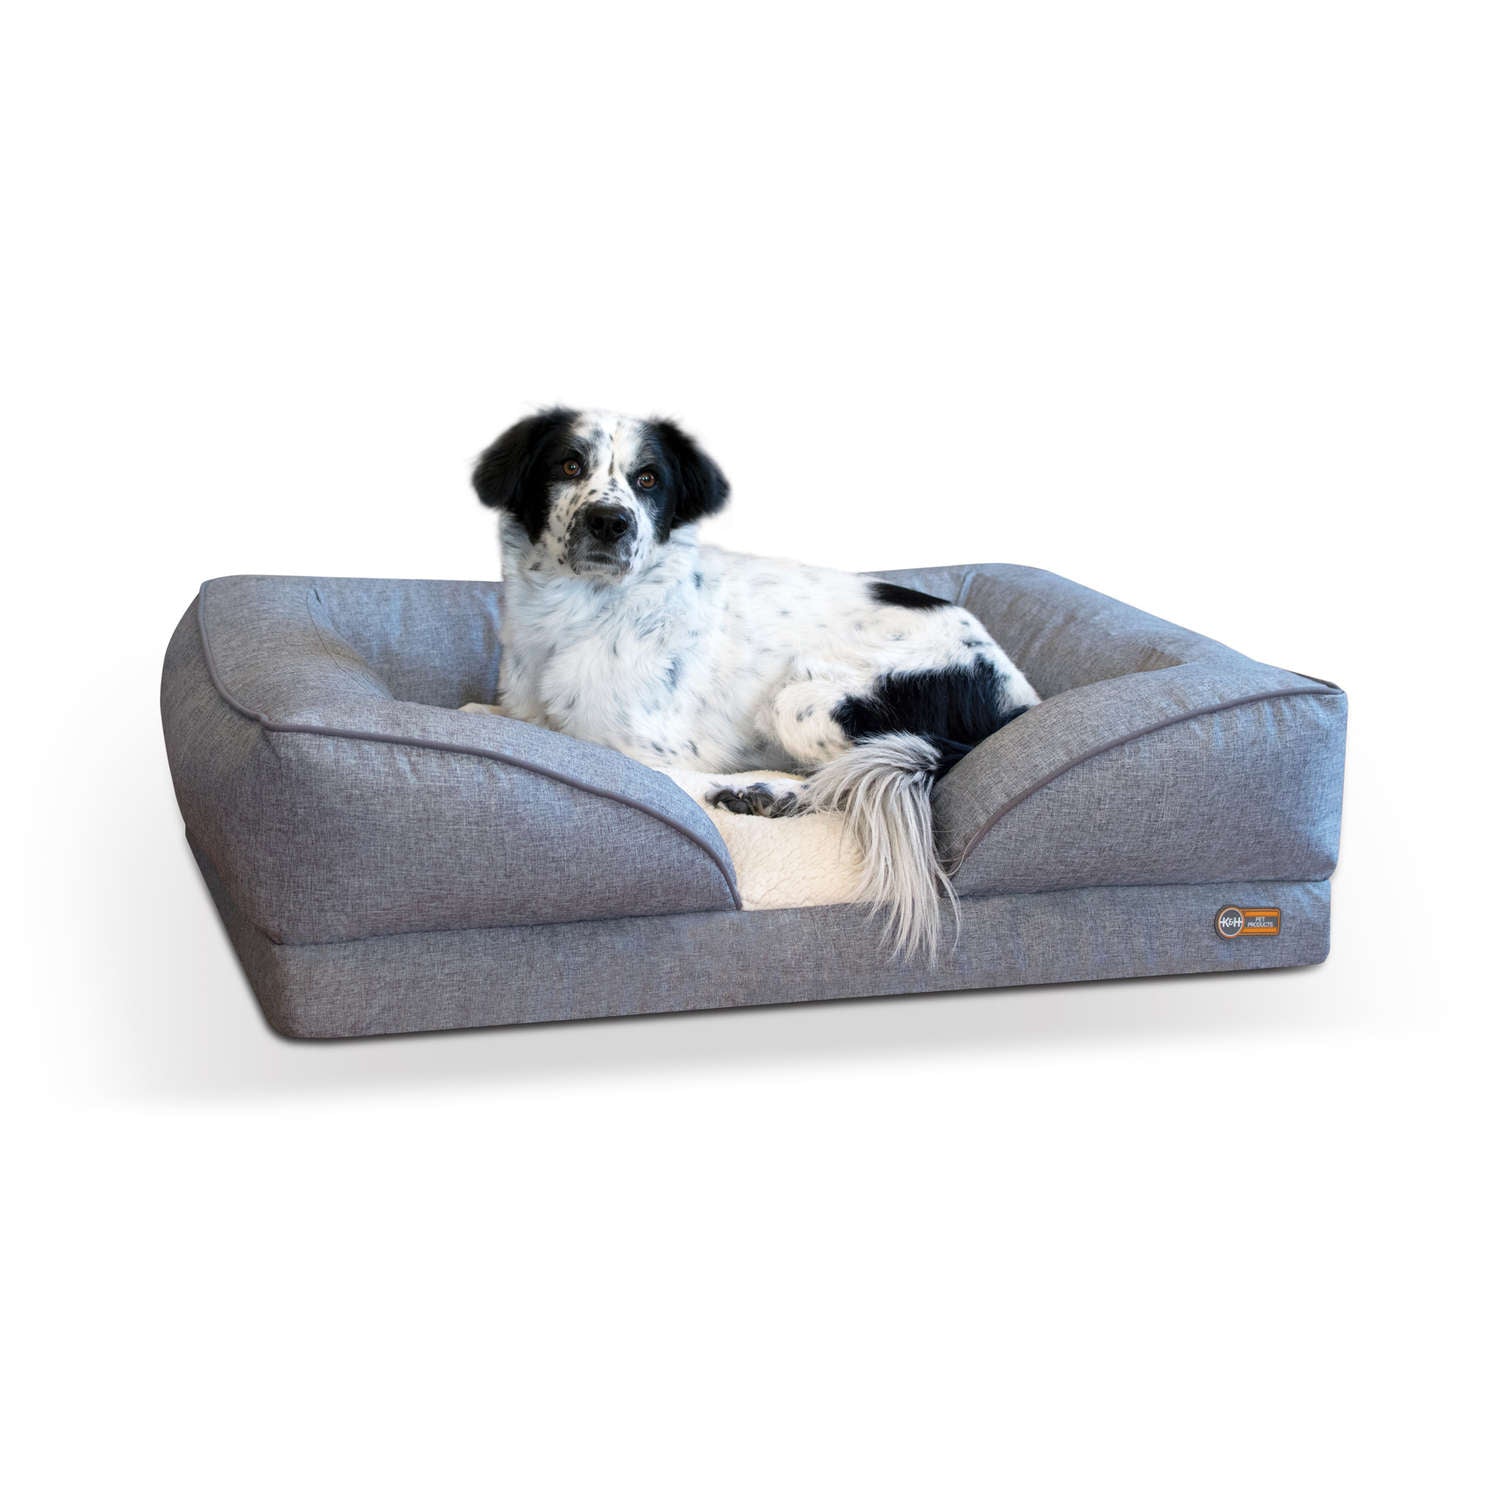 K&h Pet Products Kh4792 Pillow-top Orthopedic Pet Lounger